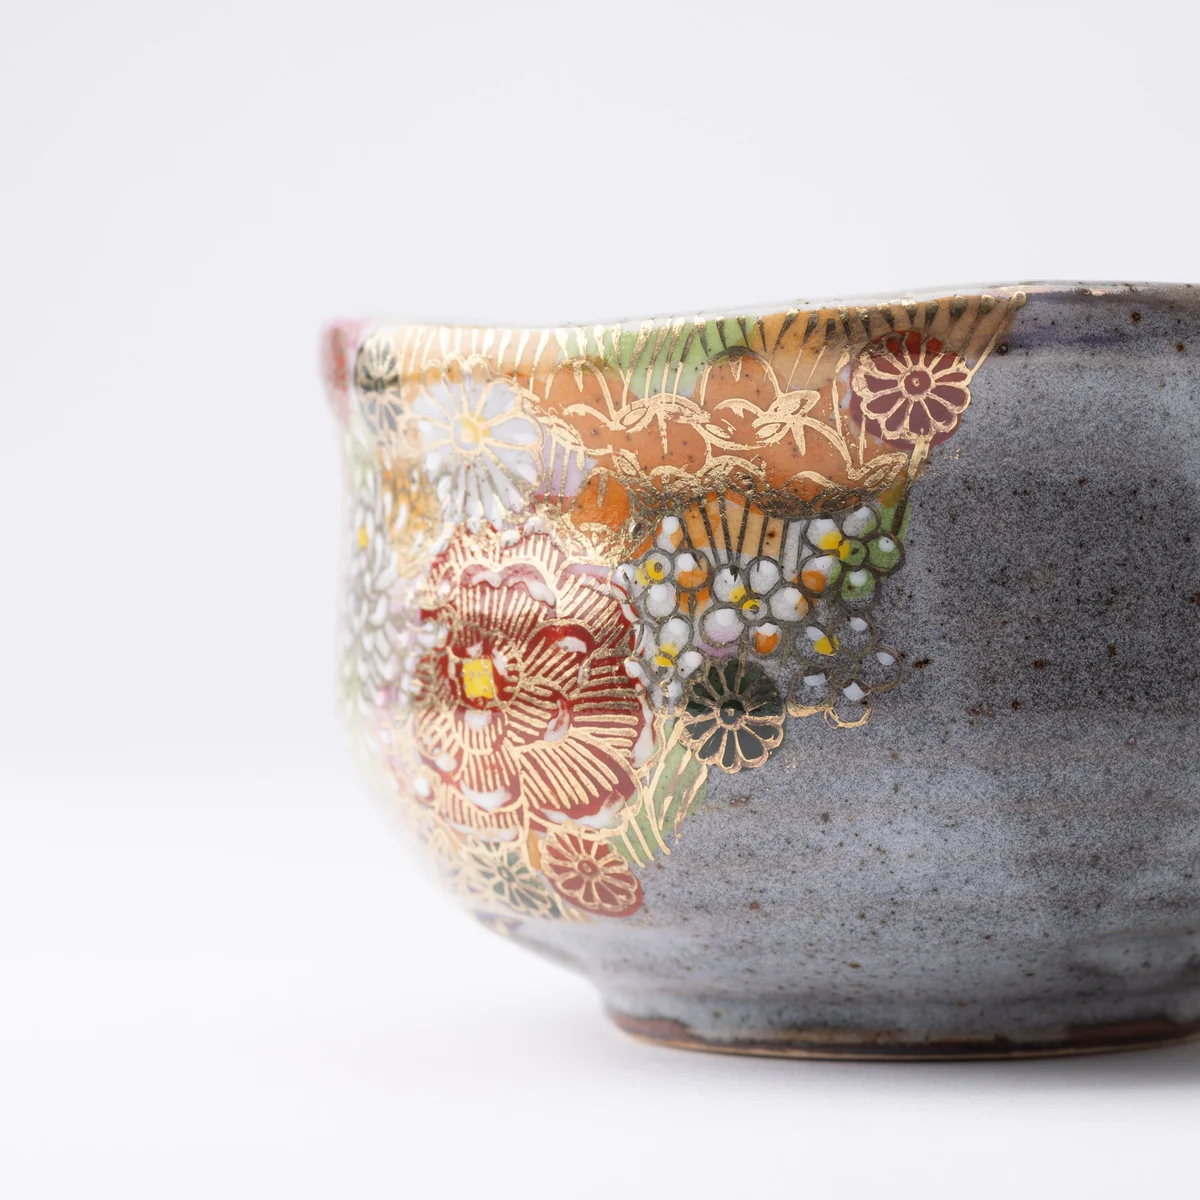 kumi-dashi chawan tea bowl with gold and painted flowers